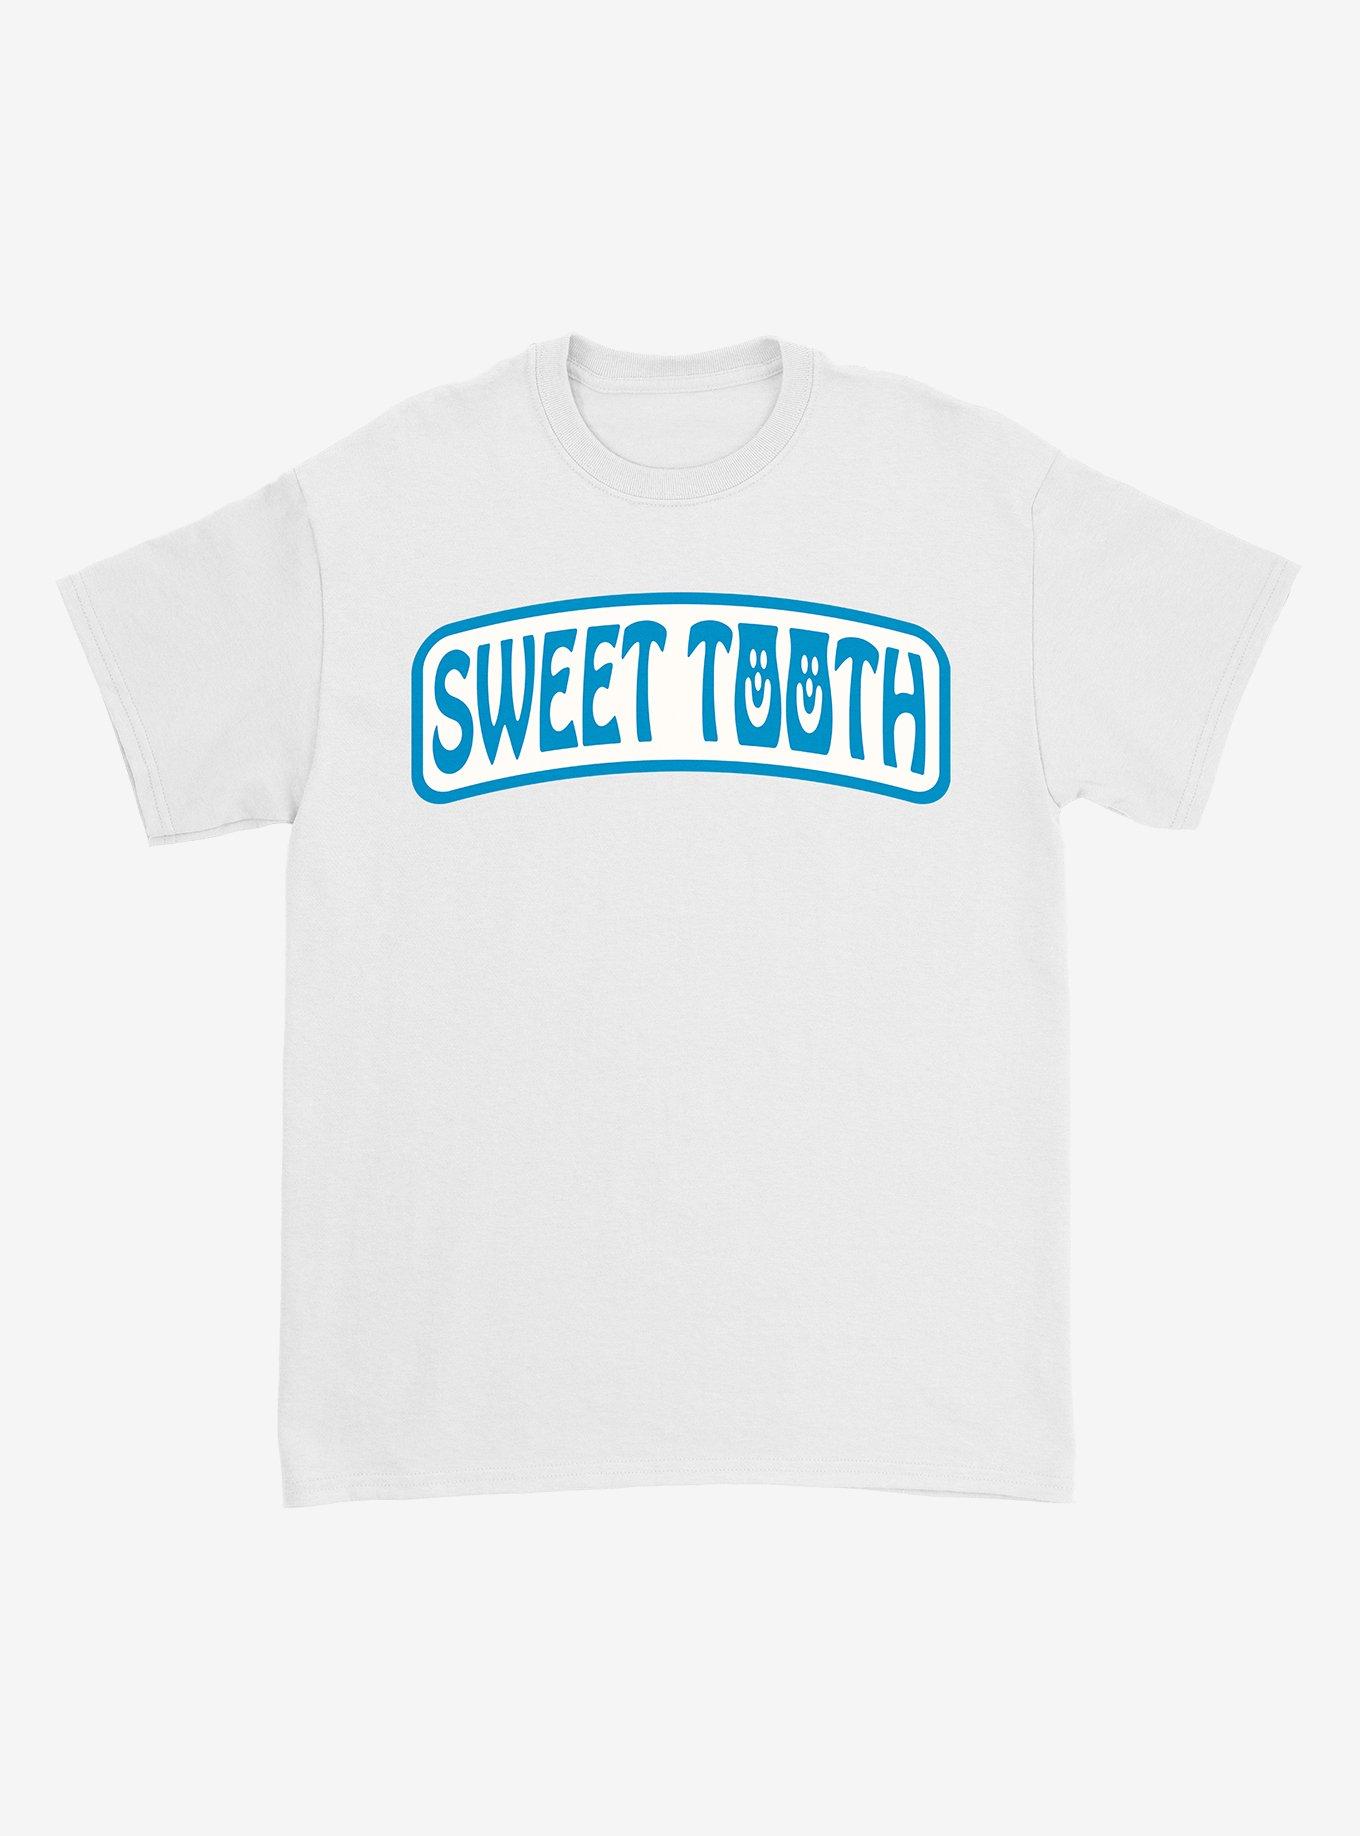 Mom Jeans Sweet Tooth T-Shirt, BRIGHT WHITE, hi-res